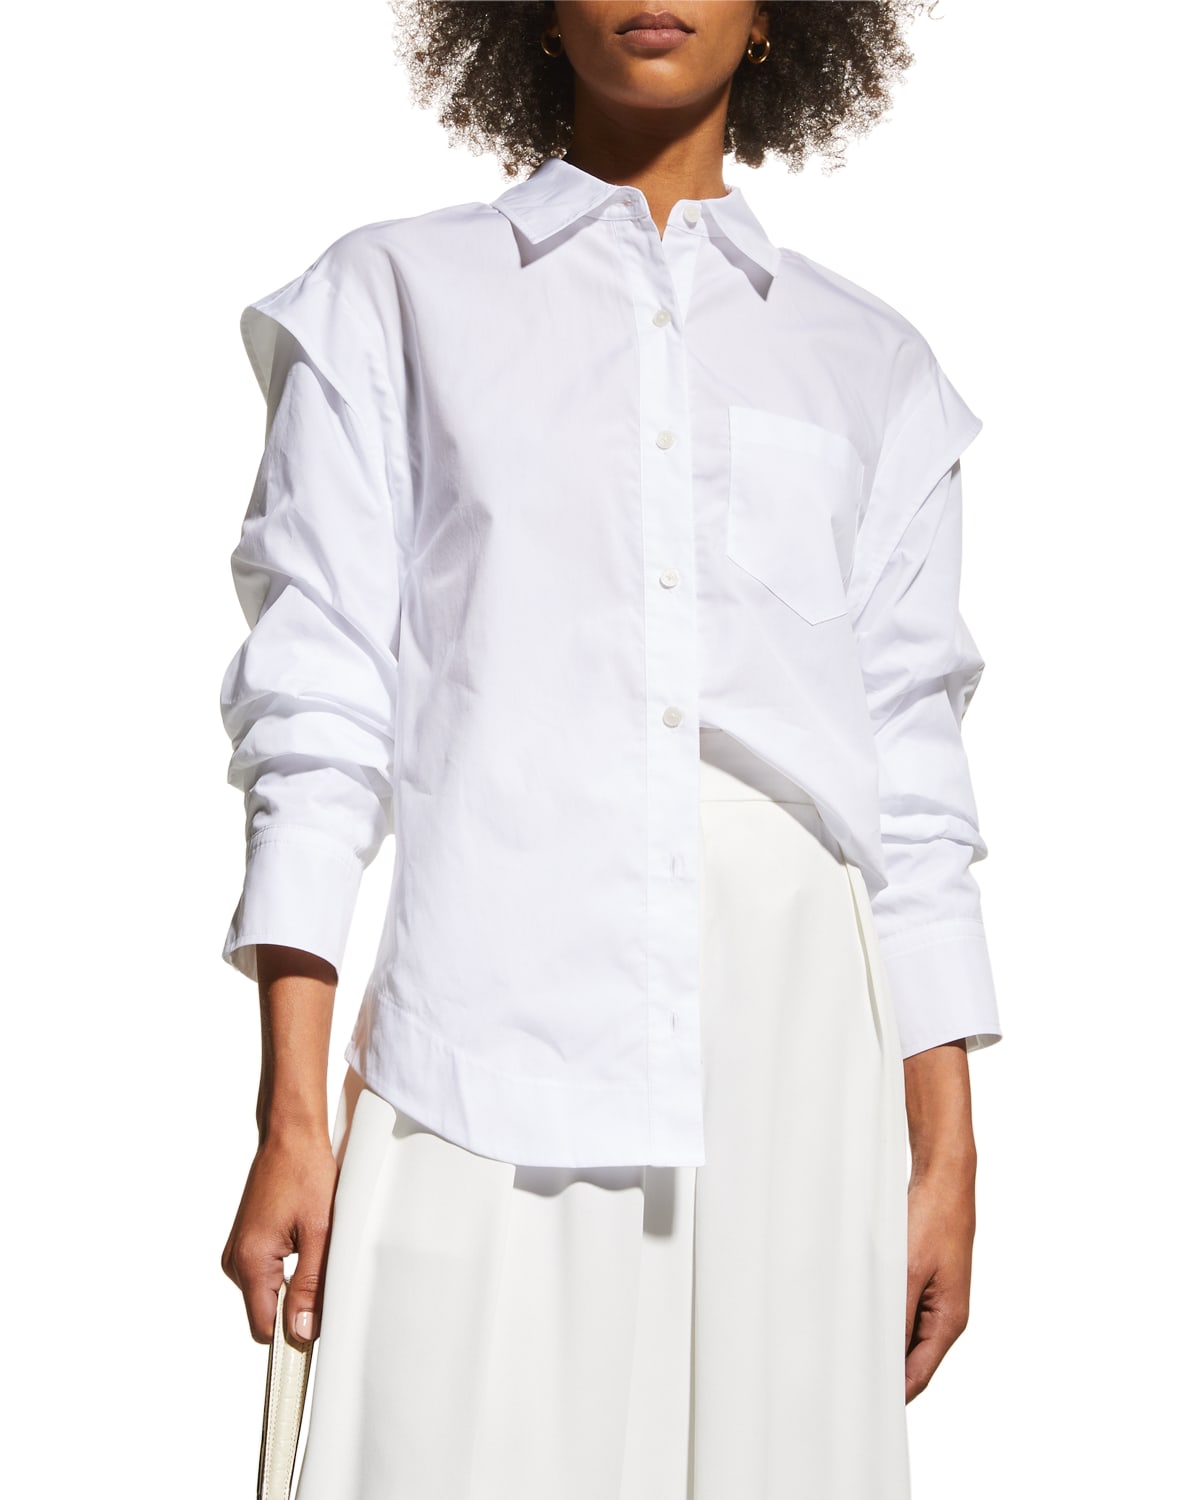 DEREK LAM 10 CROSBY MARLEY BUTTON-FRONT RUCHED SLEEVE SHIRT